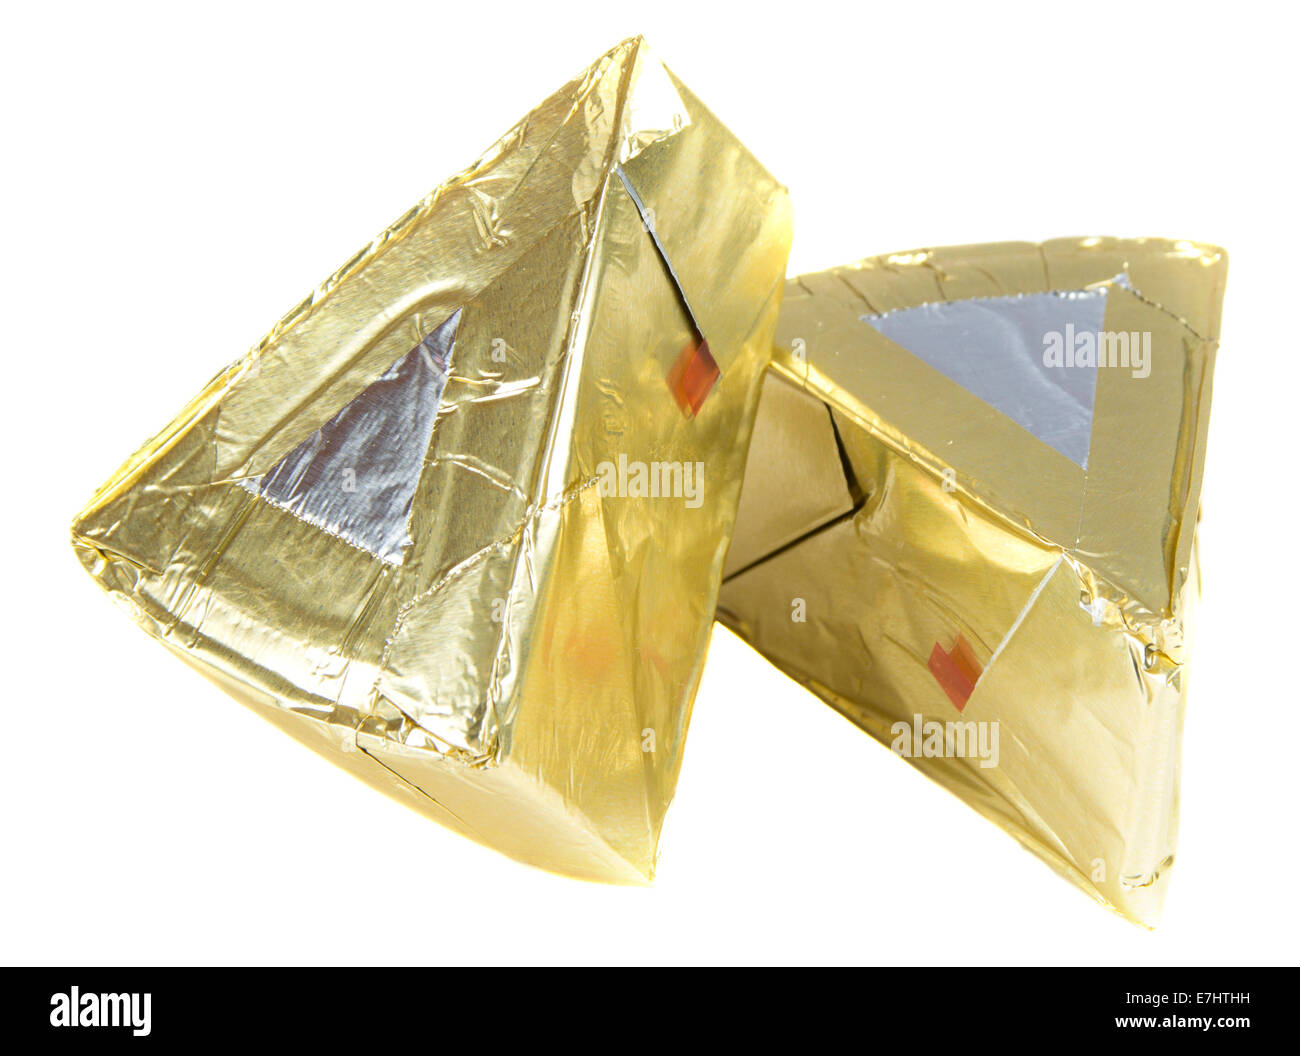 Piece of cheese in triangle foil over white background Stock Photo